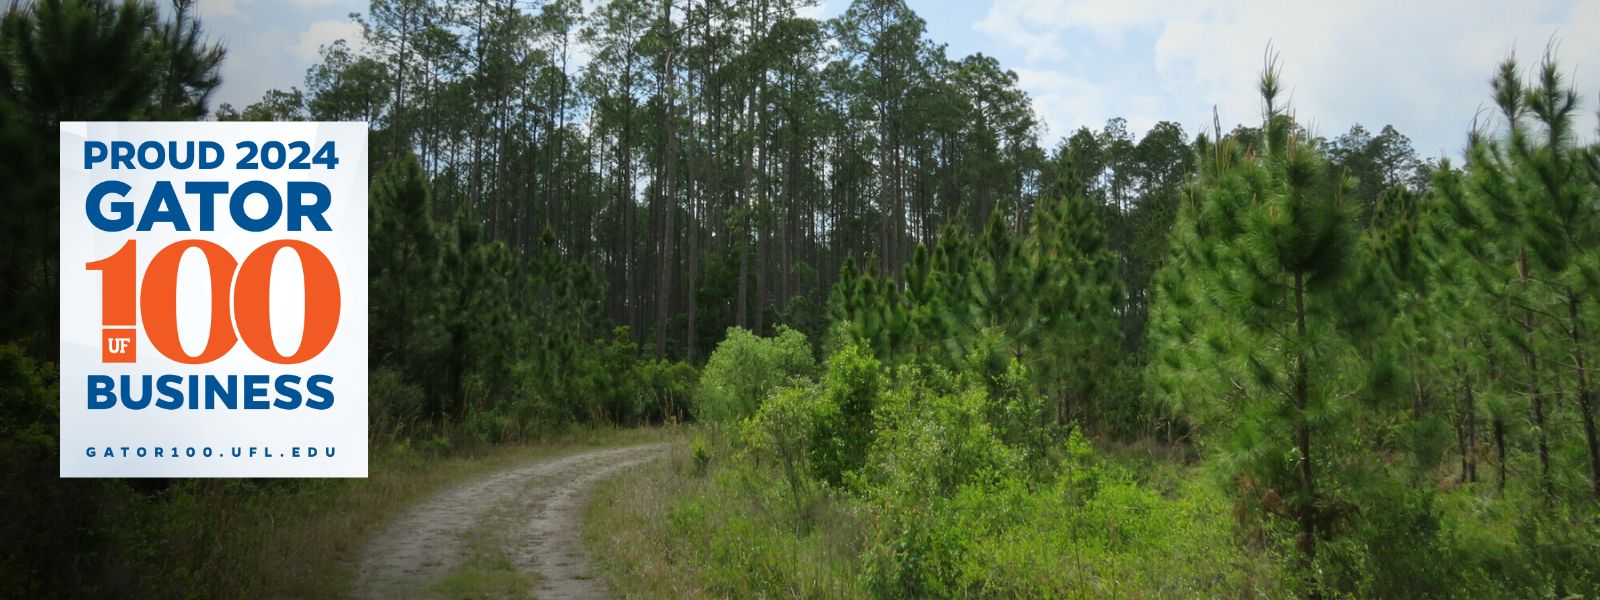 winding trail through timberland in florida